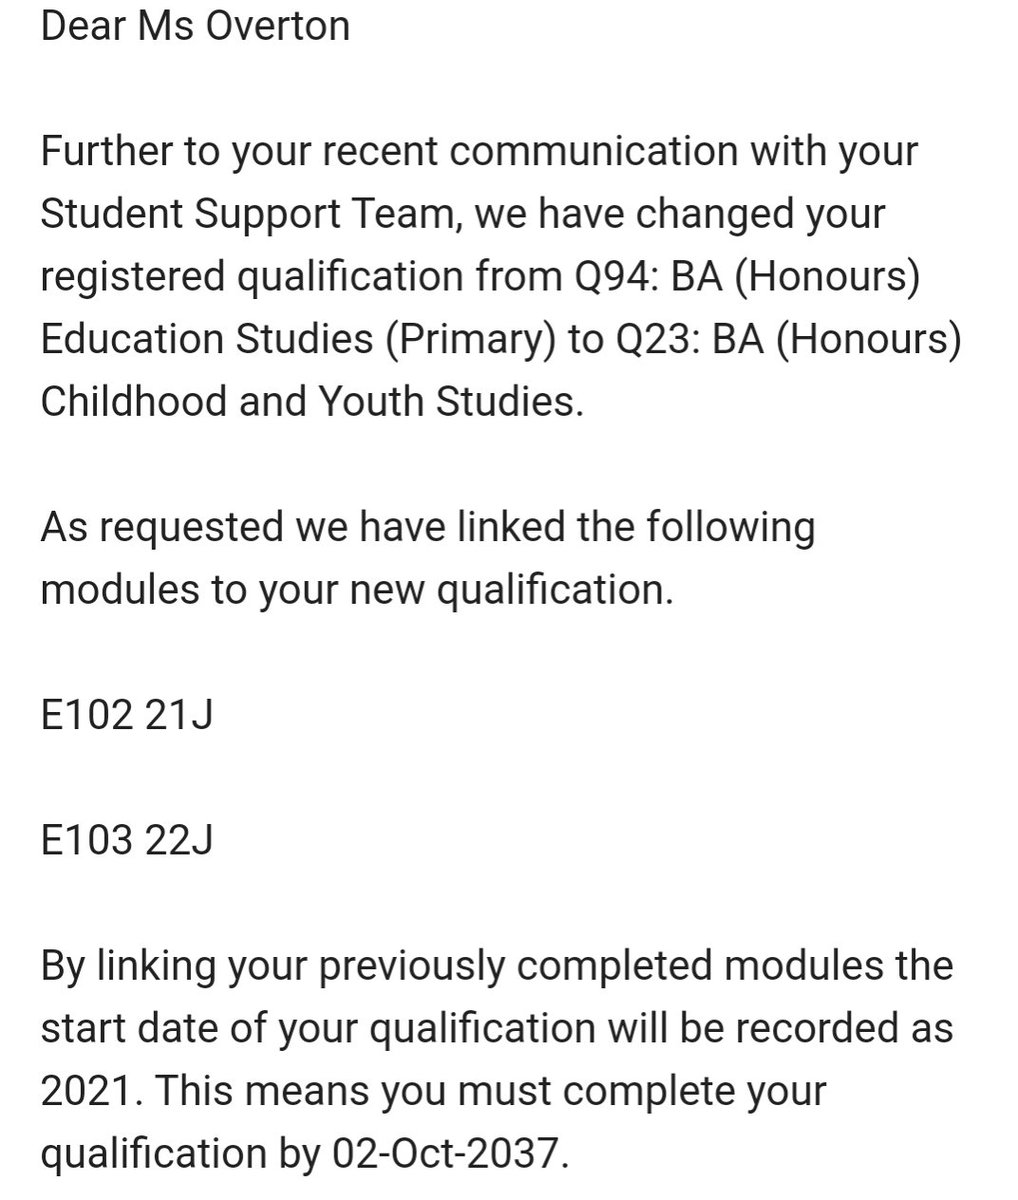 So pleased I chose @OpenUniversity to study with!During a very tricky time they let me defer for a year.After re-evaluating what I want to do they have let me change to a diff degree and I'm feeling so excited to get started again this Oct!#childdevelopment #childpsychology